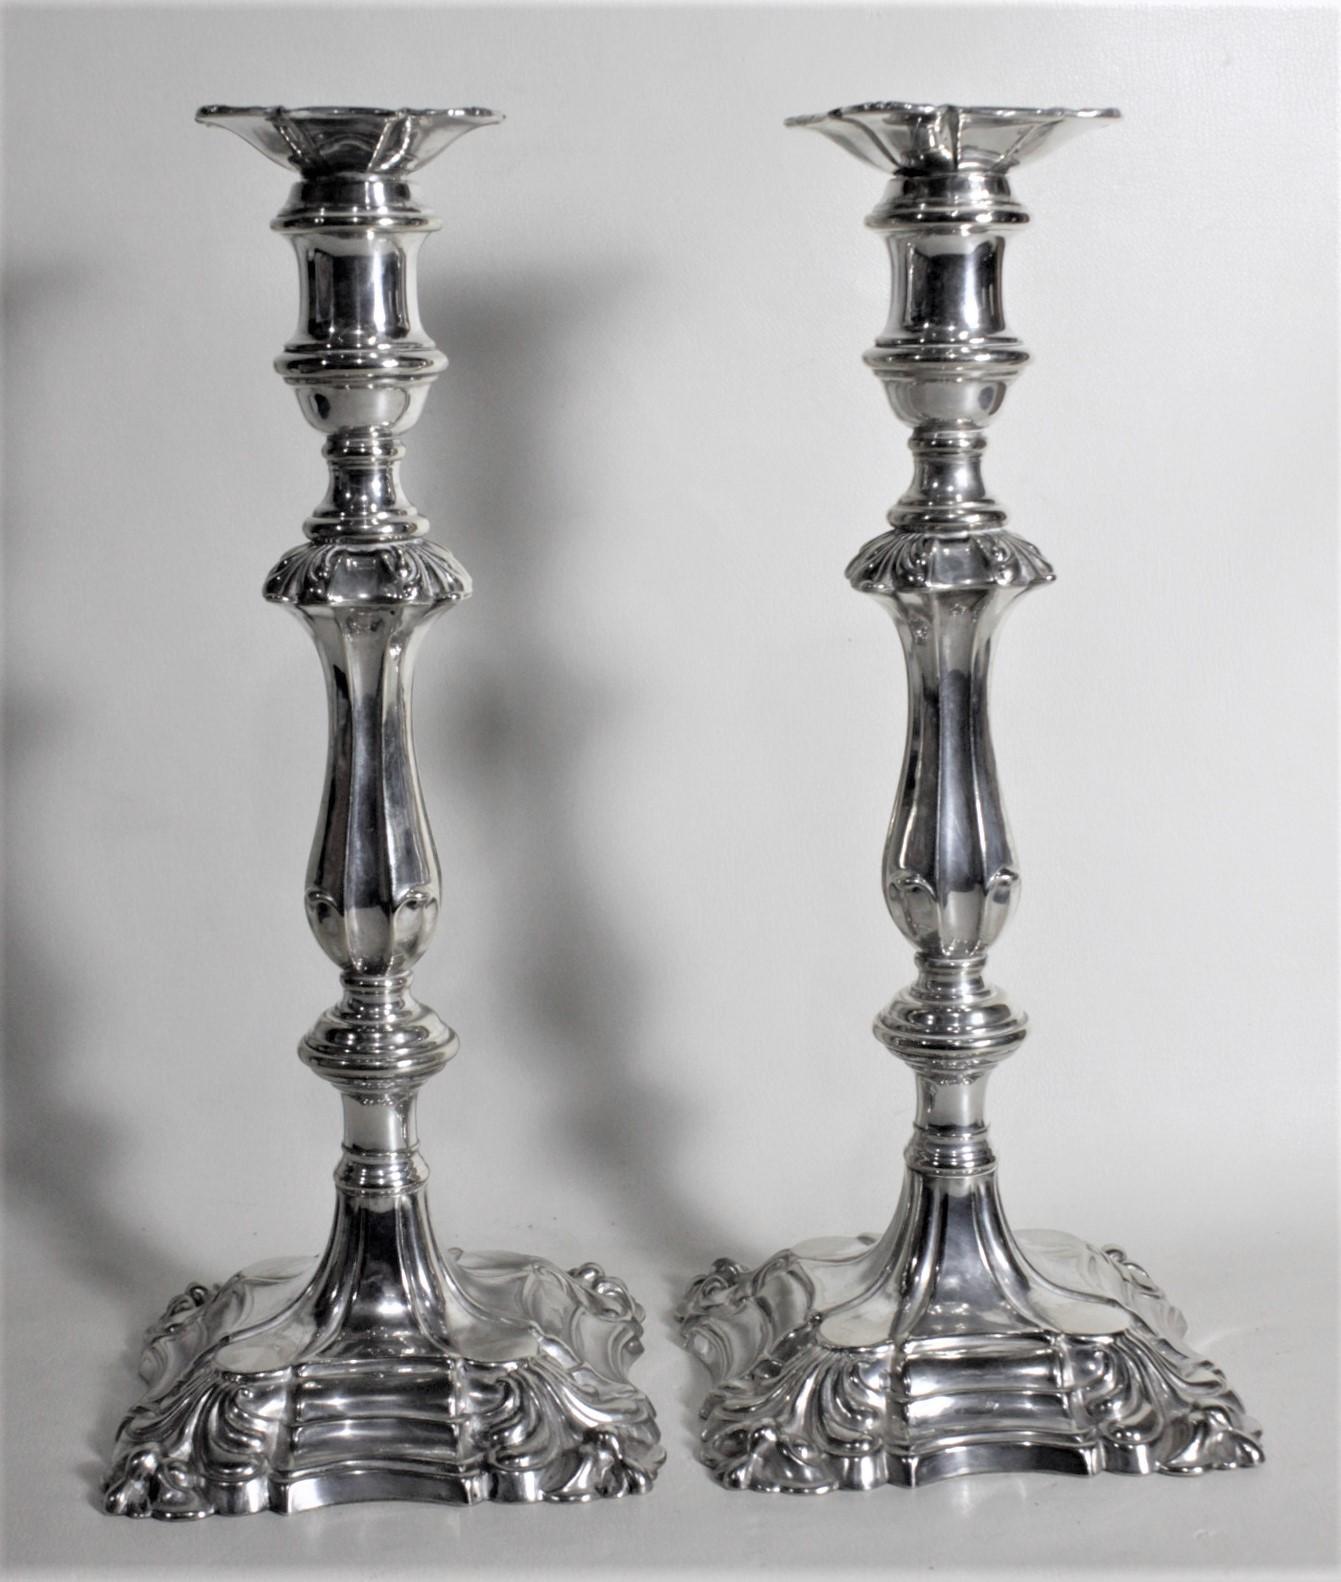 This pair of antique silver plated candlesticks are hallmarked 